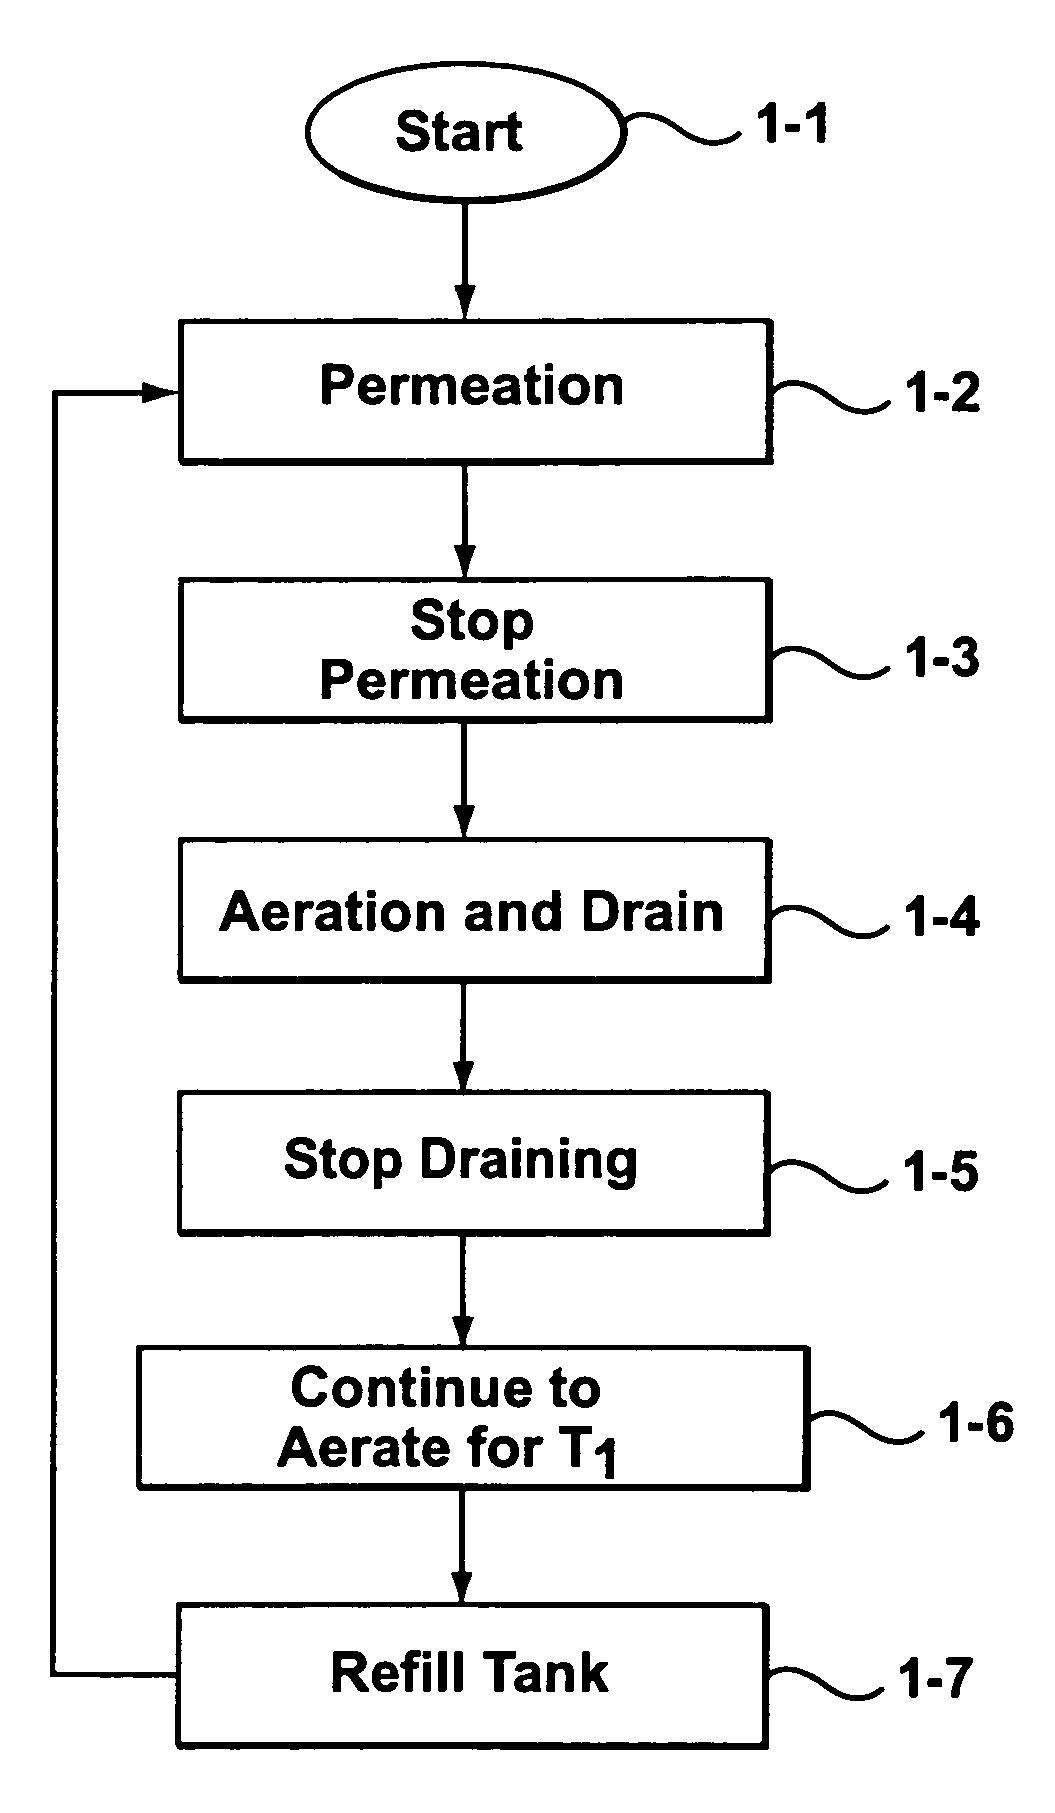 Membrane filter cleansing process